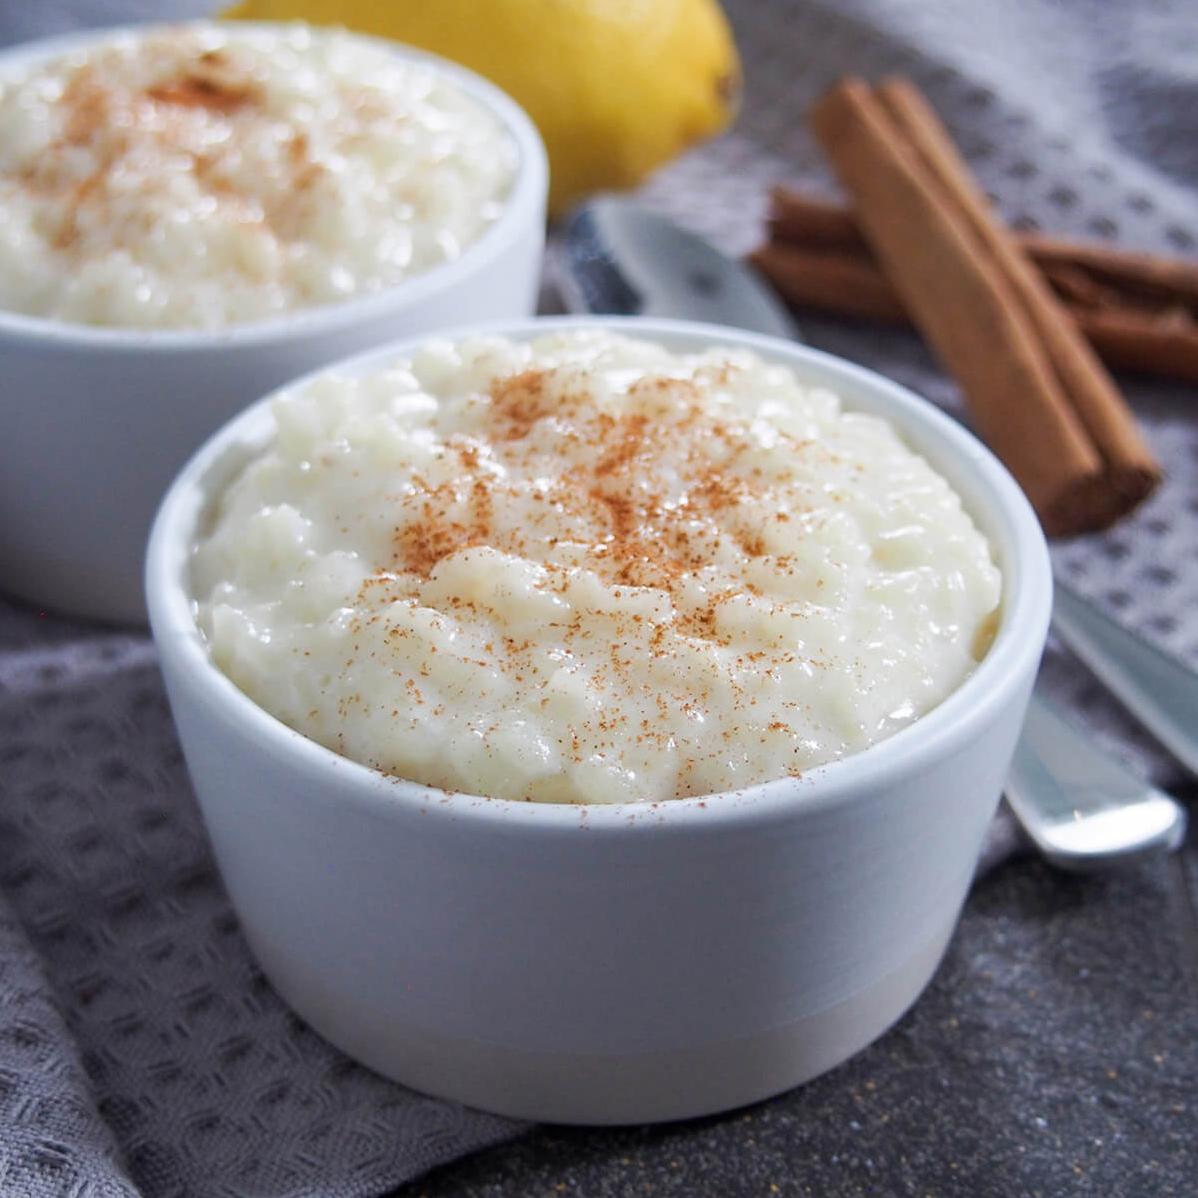  This arroz con leche recipe is the definition of comfort food